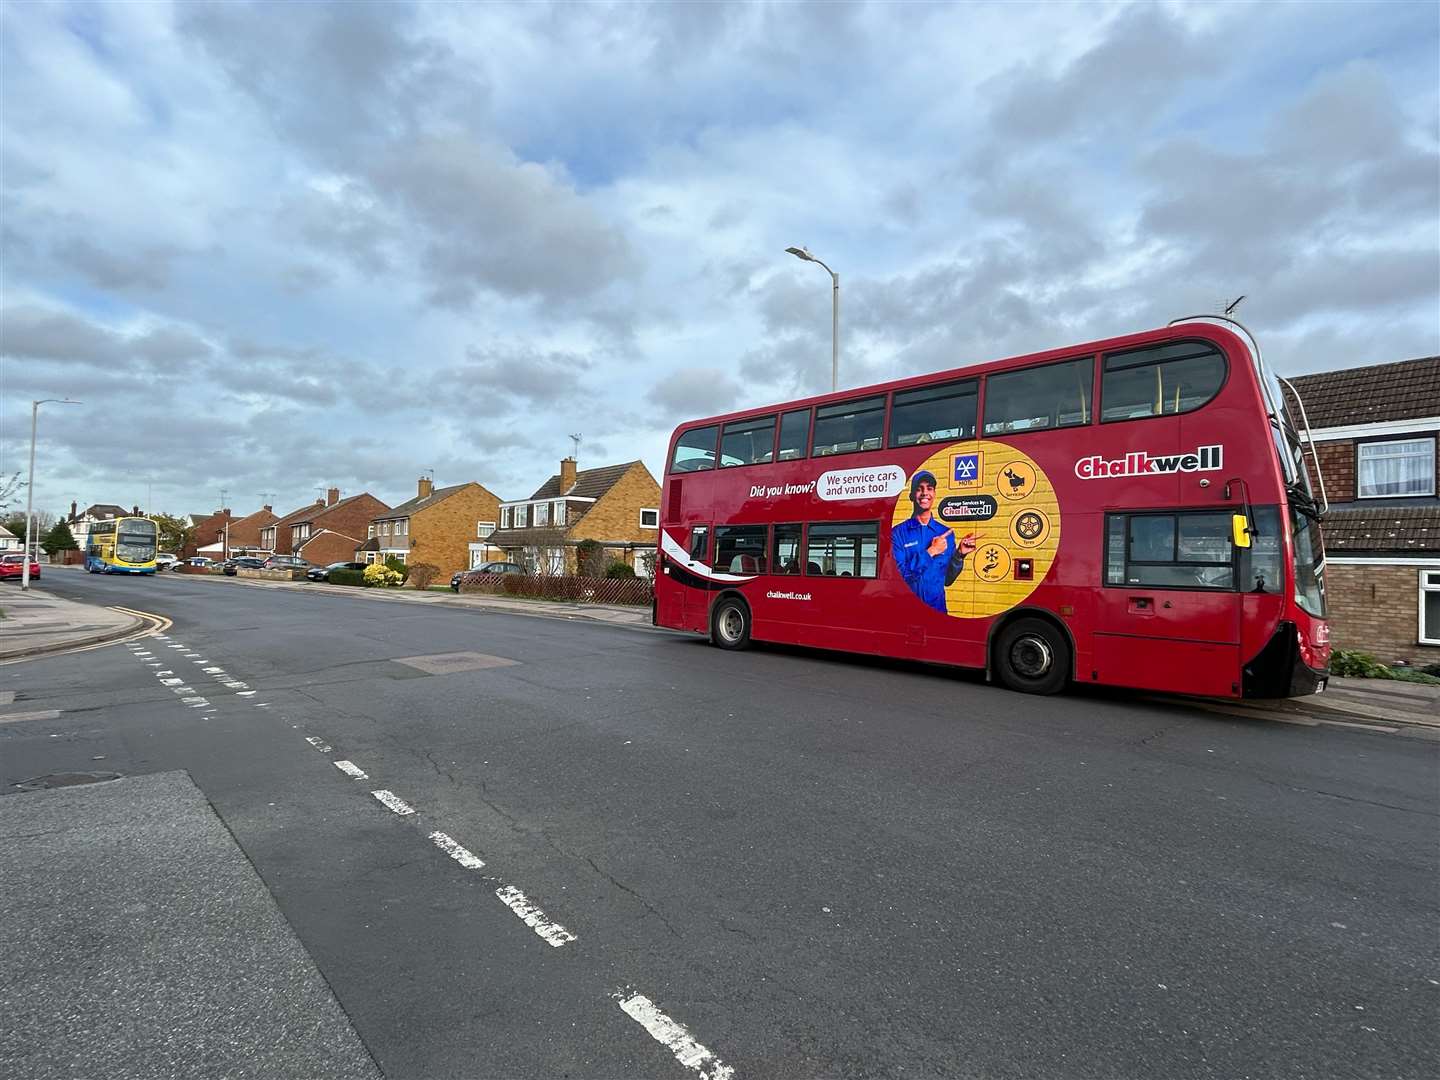 School buses have been parking in Sittingbourne's Adelaide Drive